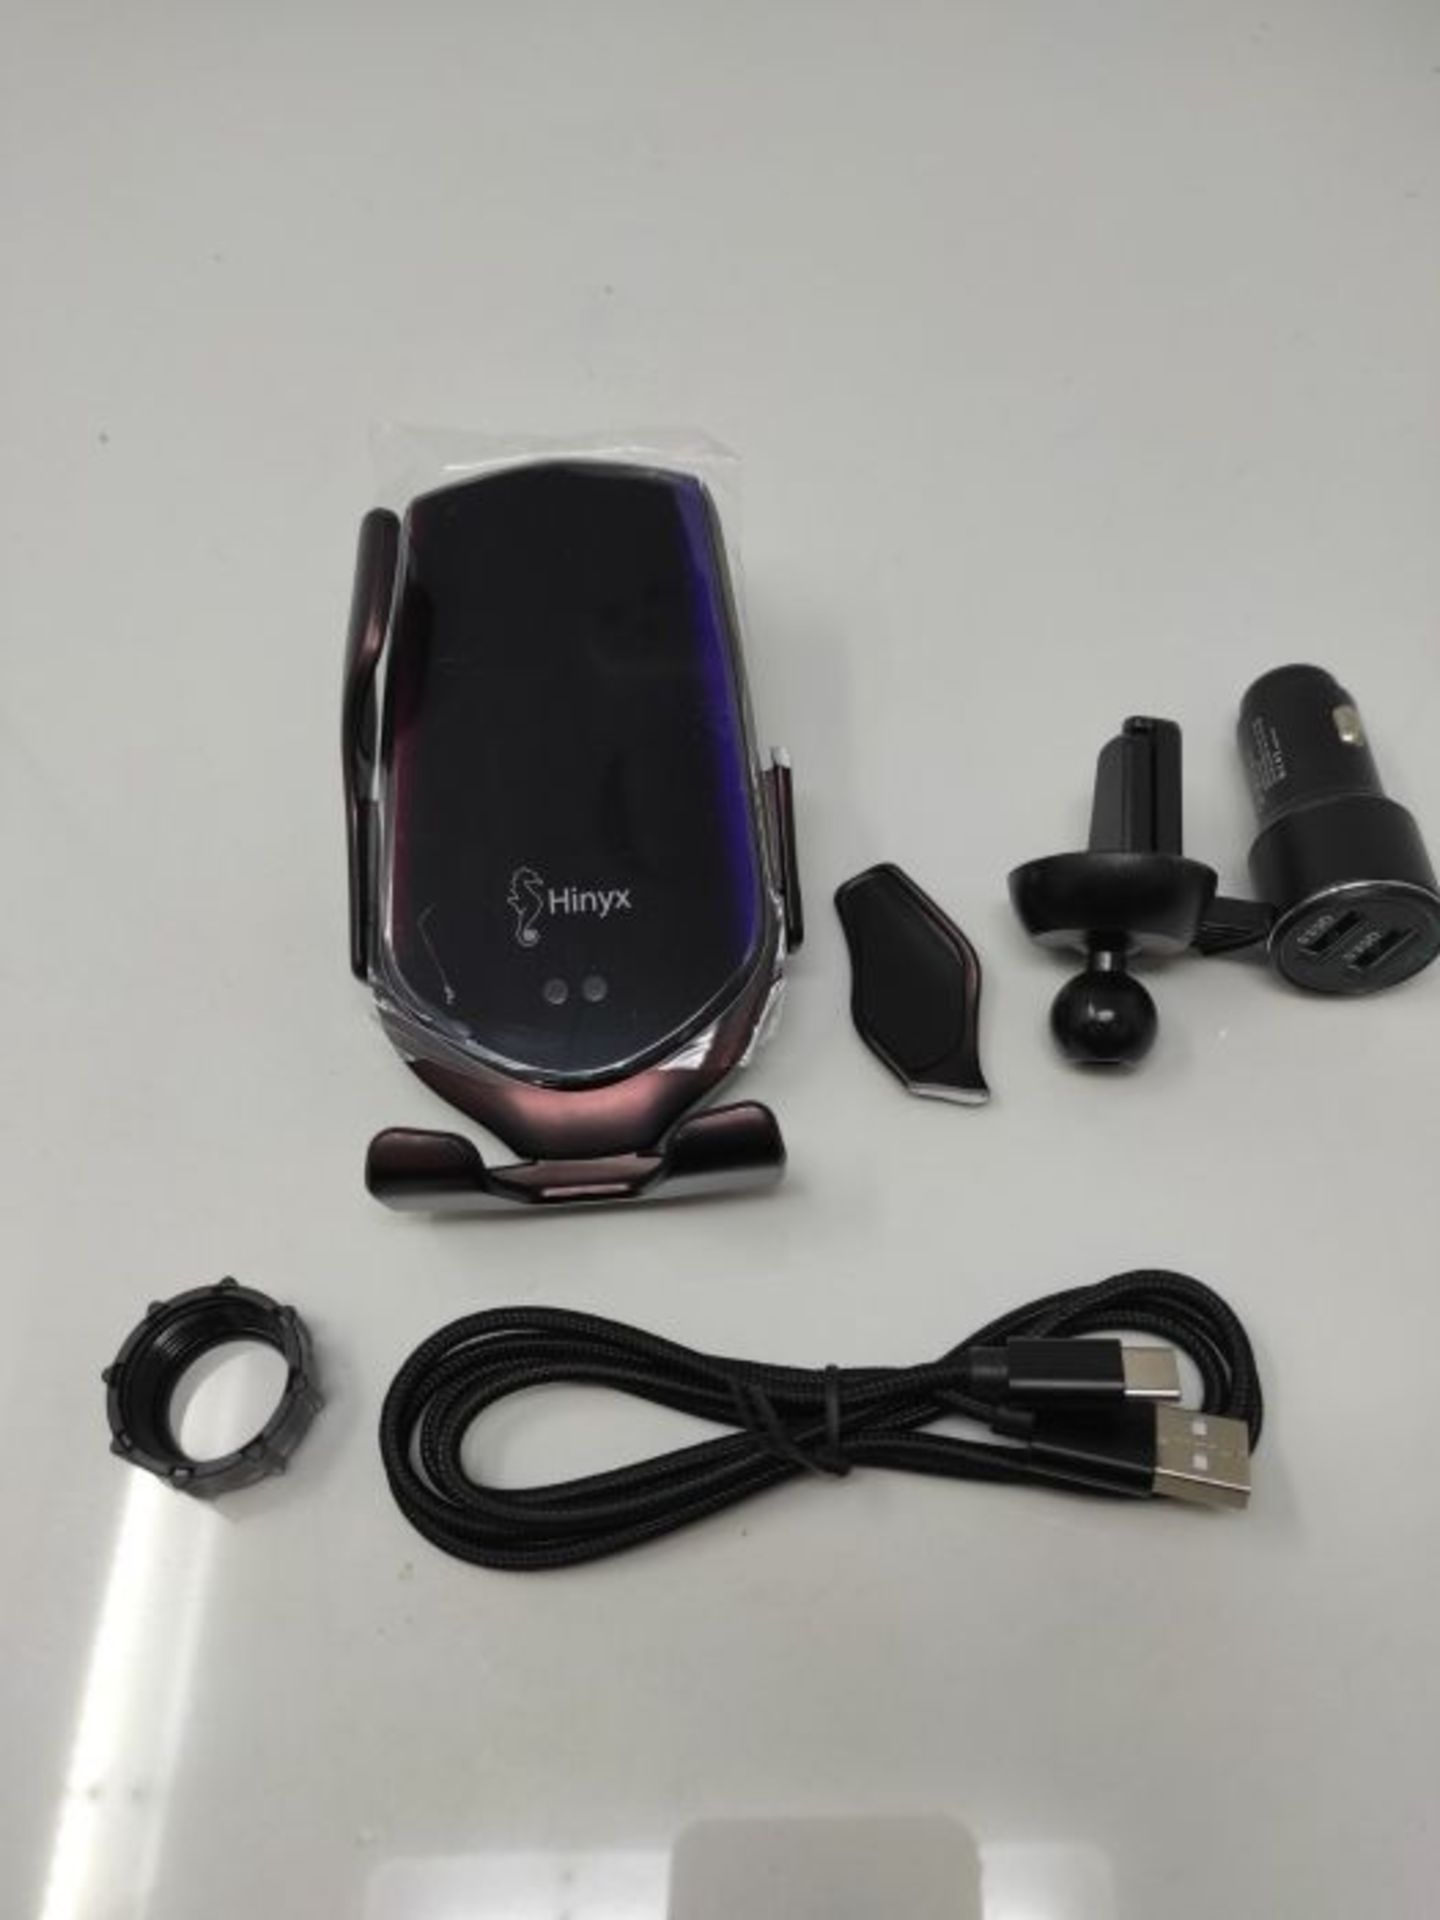 [CRACKED] Hinyx Wireless Car Charger - 2 in 1 Qi 15W Fast Wireless Auto-Clamp Charge C - Image 3 of 3